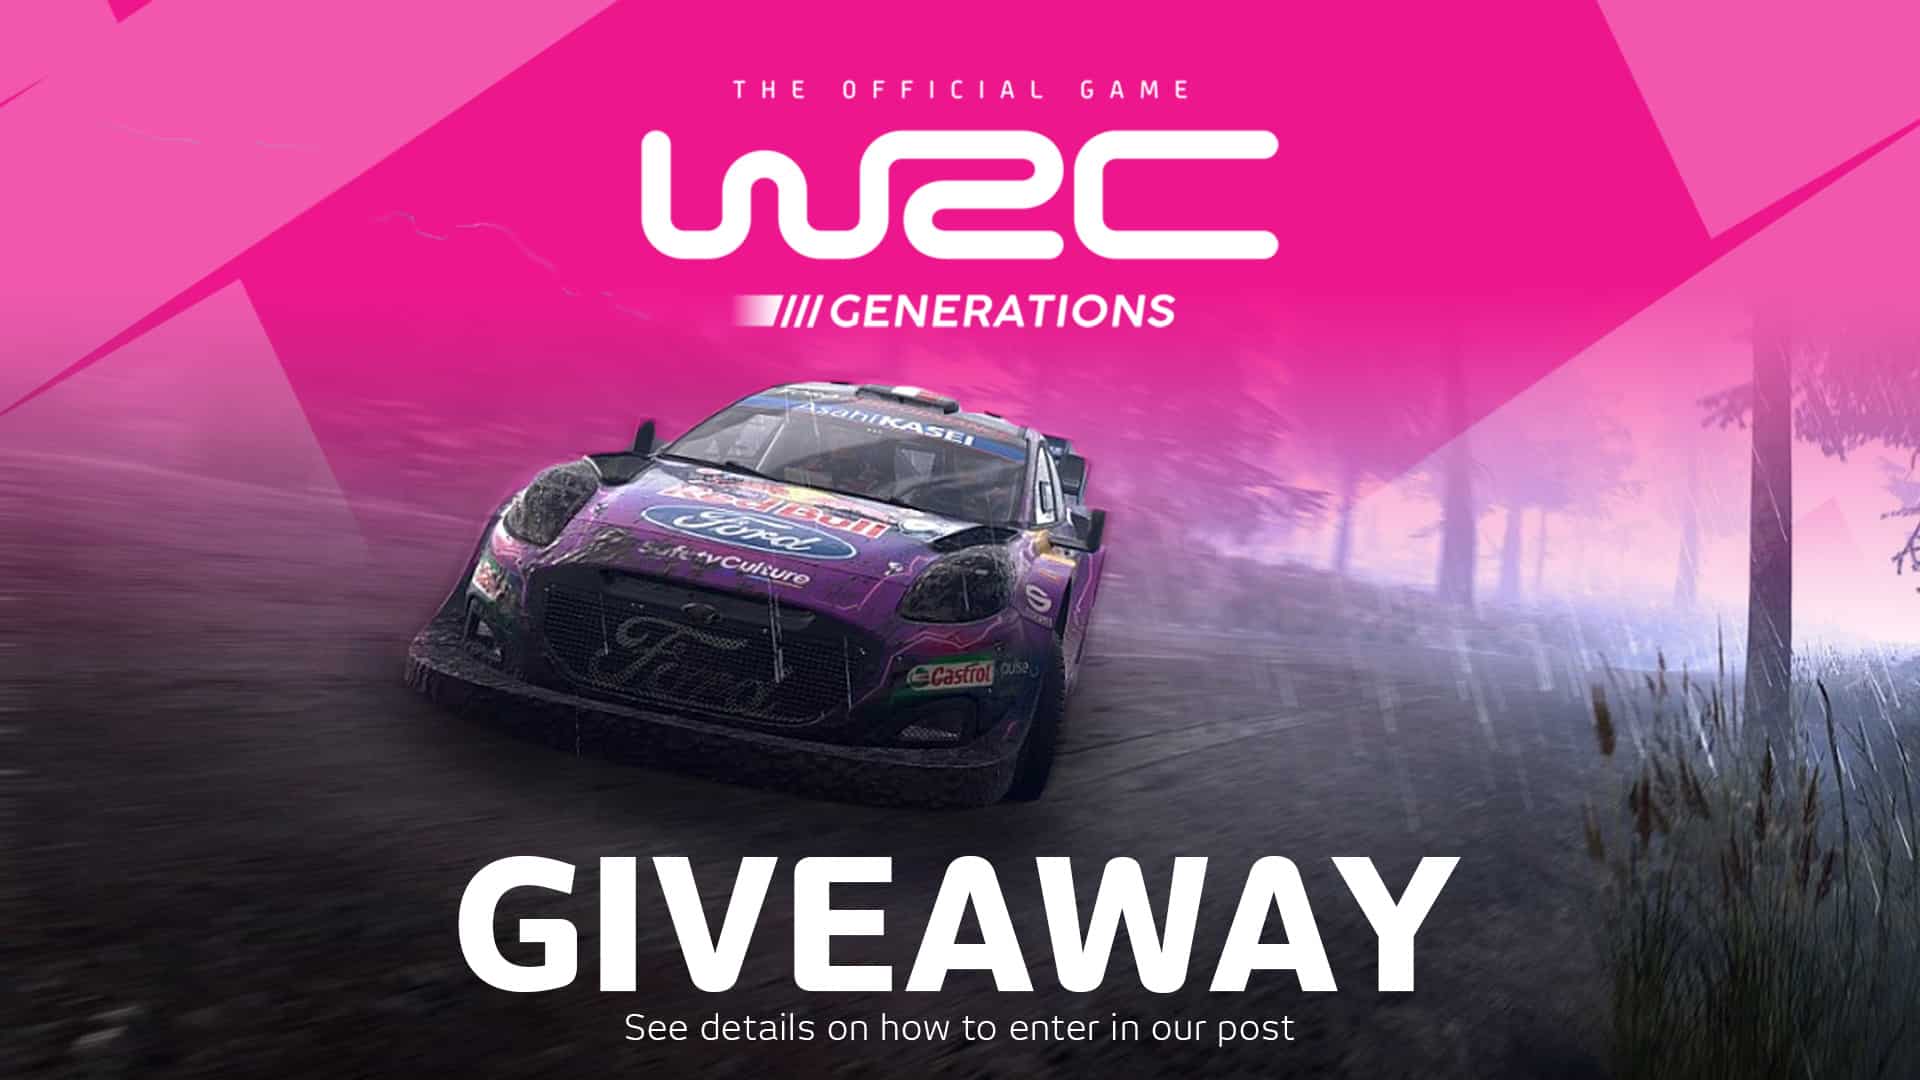 You could win a copy of WRC Generations